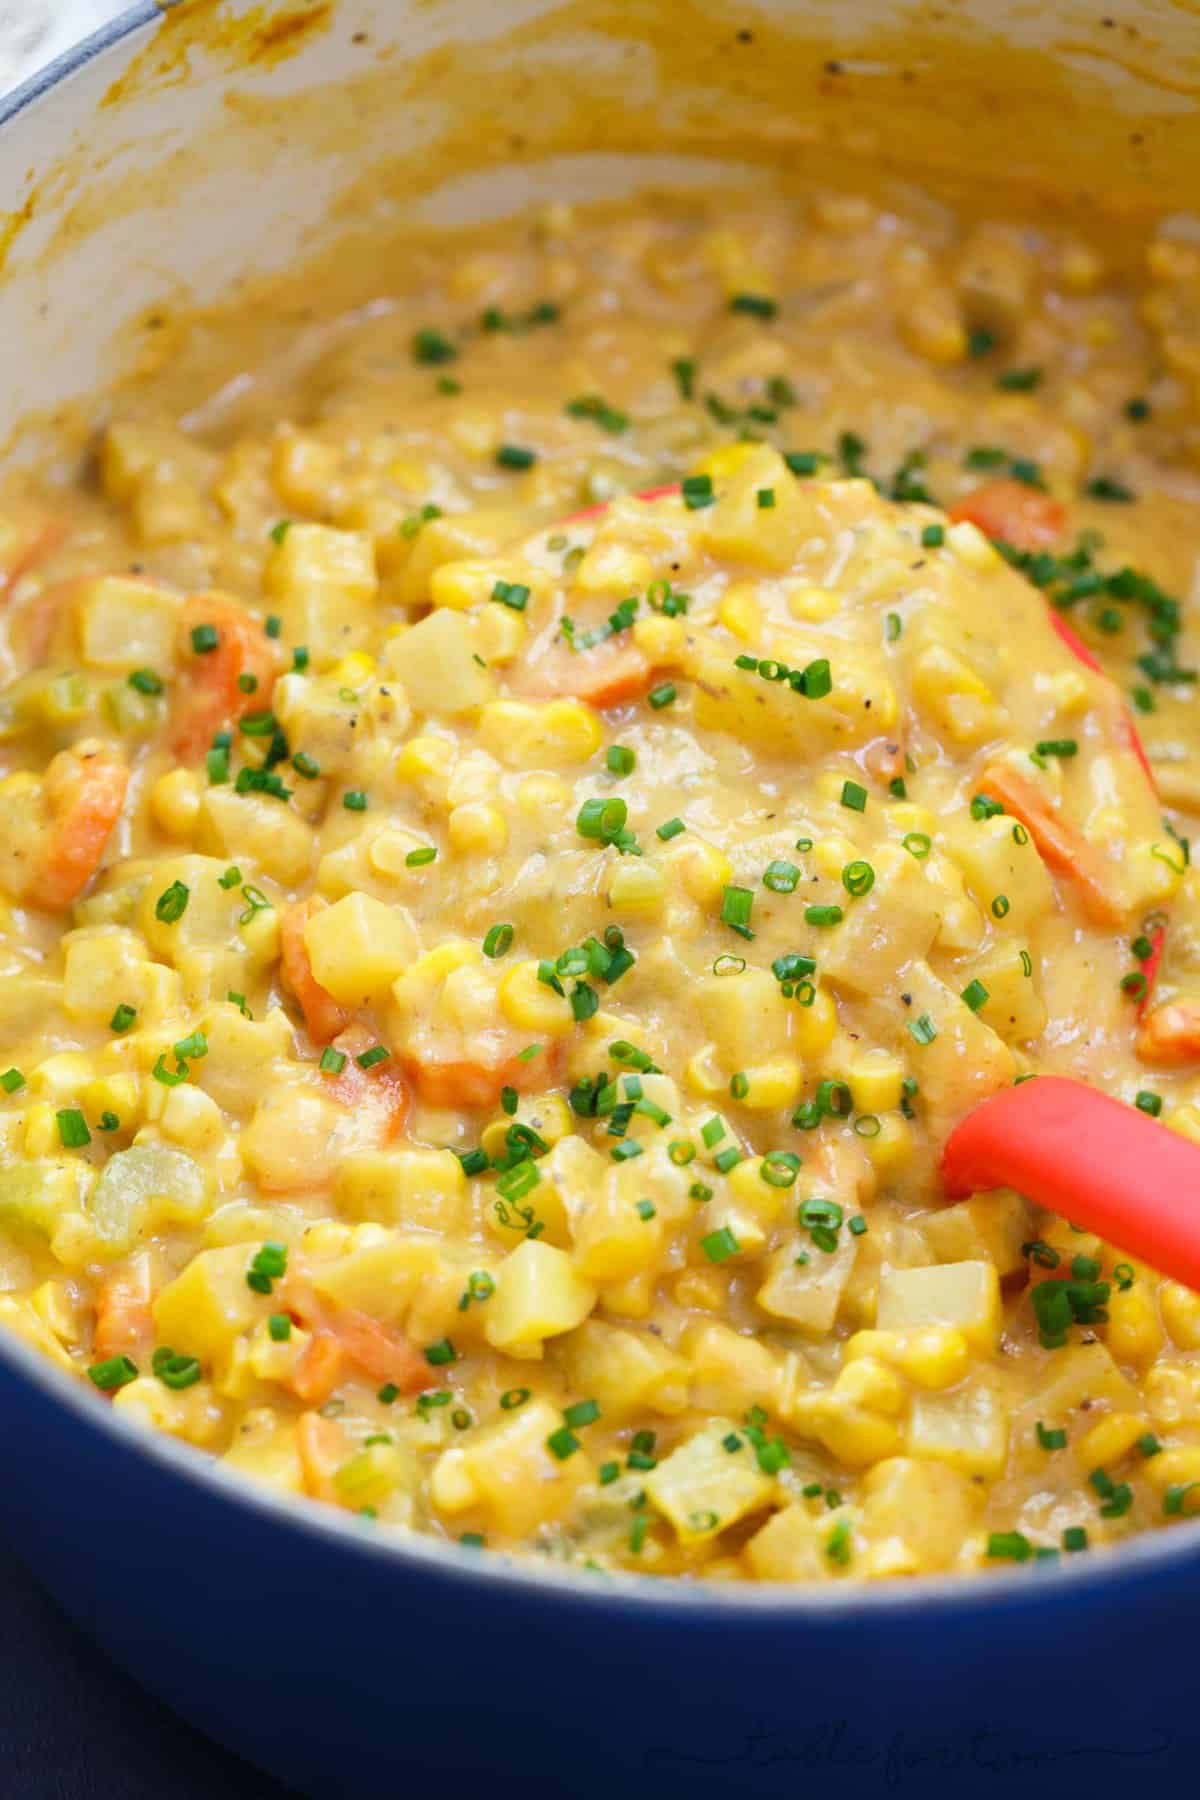 A hearty and comforting corn and pumpkin chowder that will warm you right up! Super chunky and full of texture!